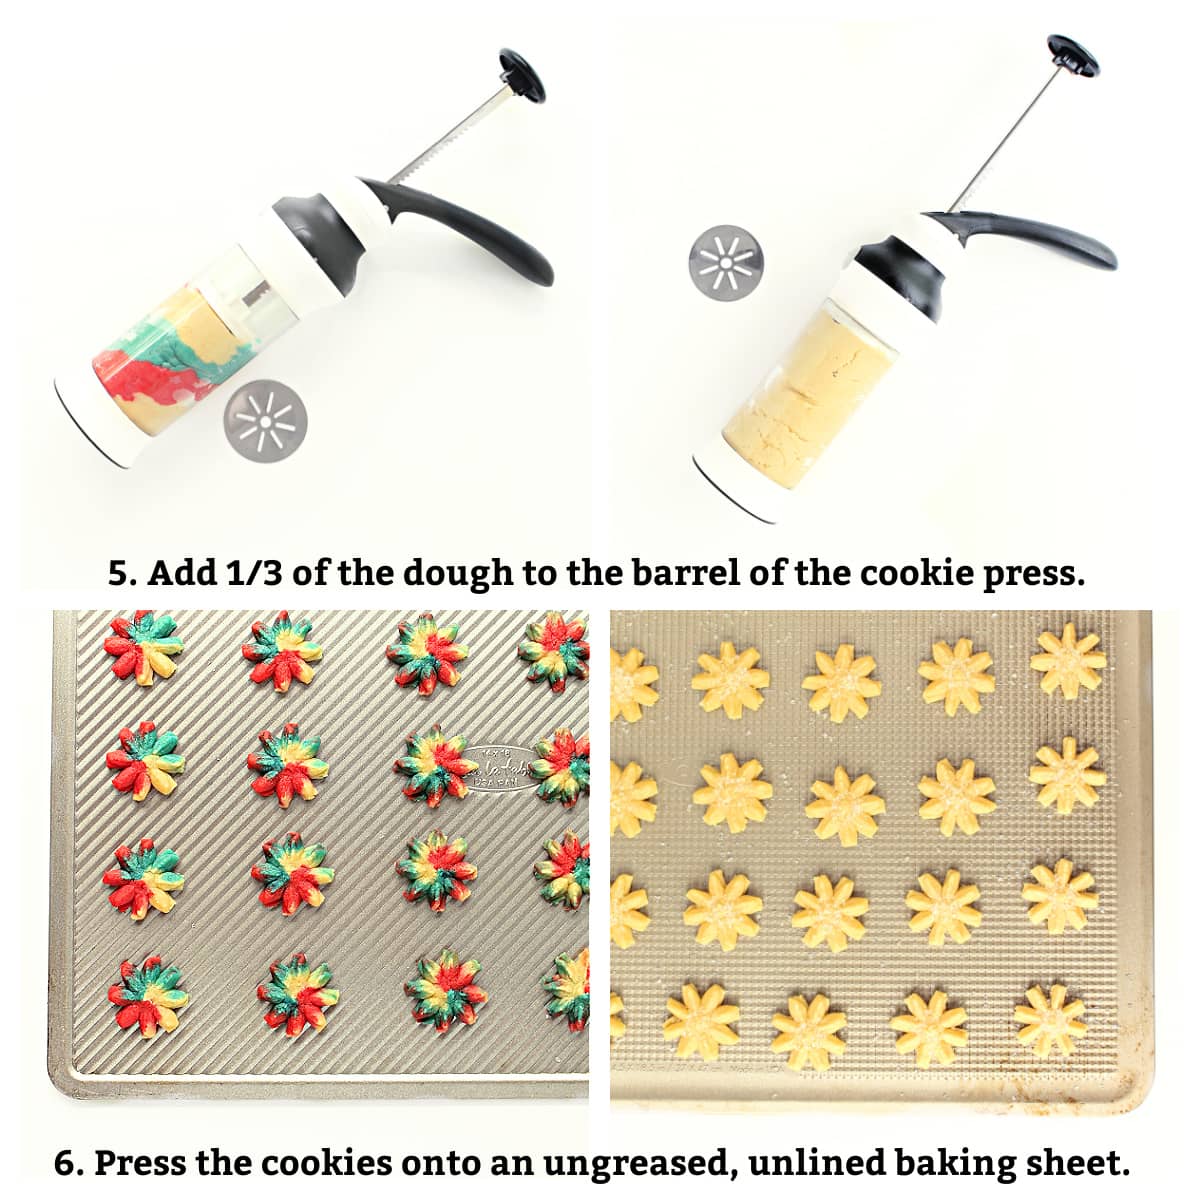 Instructions labeled: add ⅓ dough to cookie press, press cookies onto ungreased baking sheet.